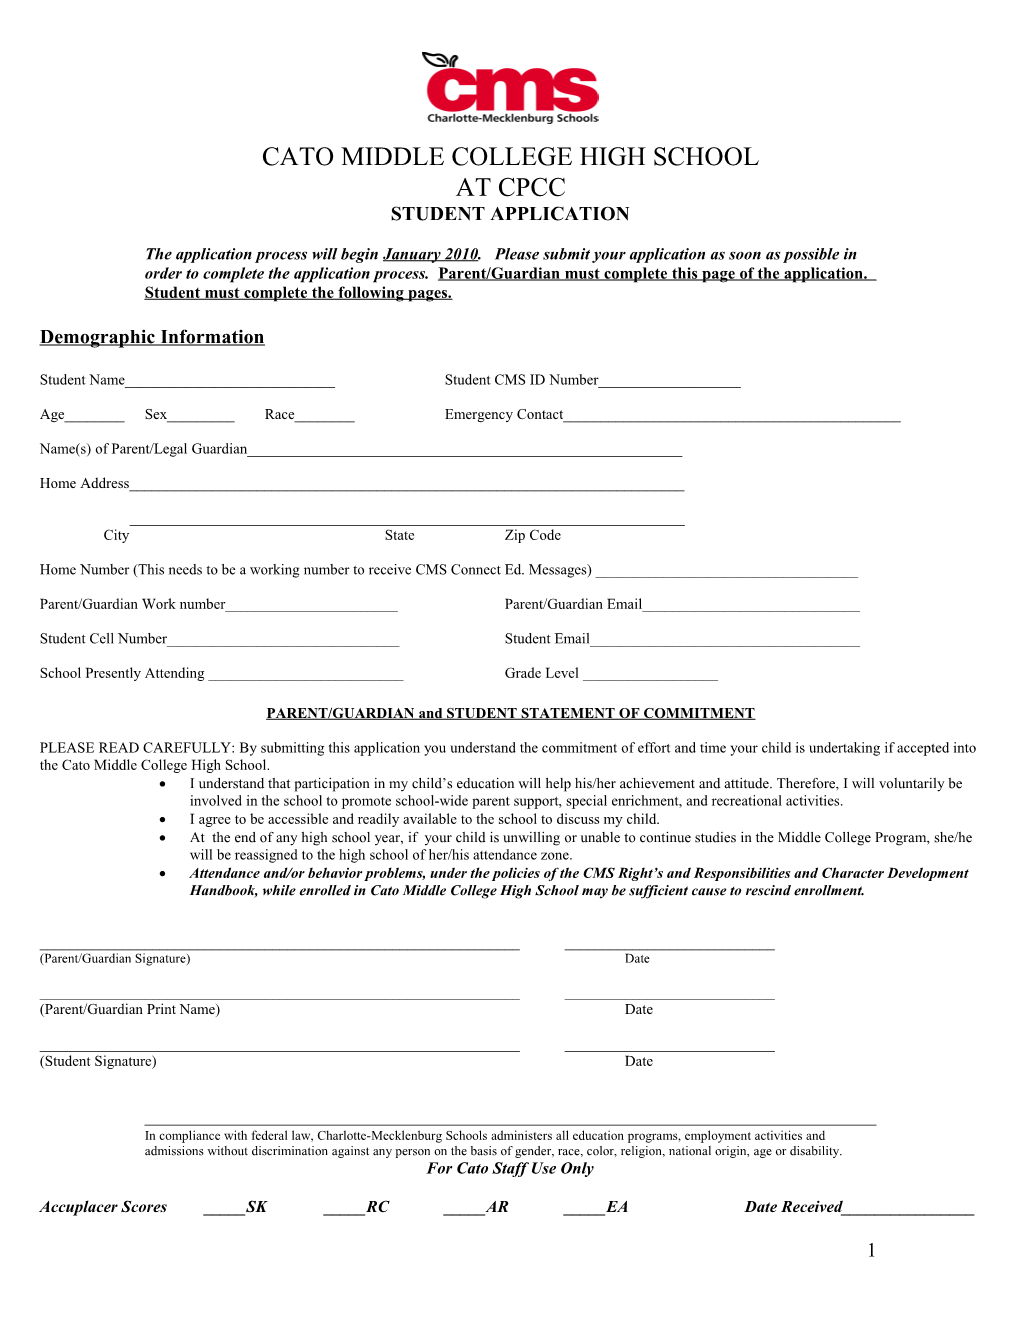 Cato Middle College High School Student Application